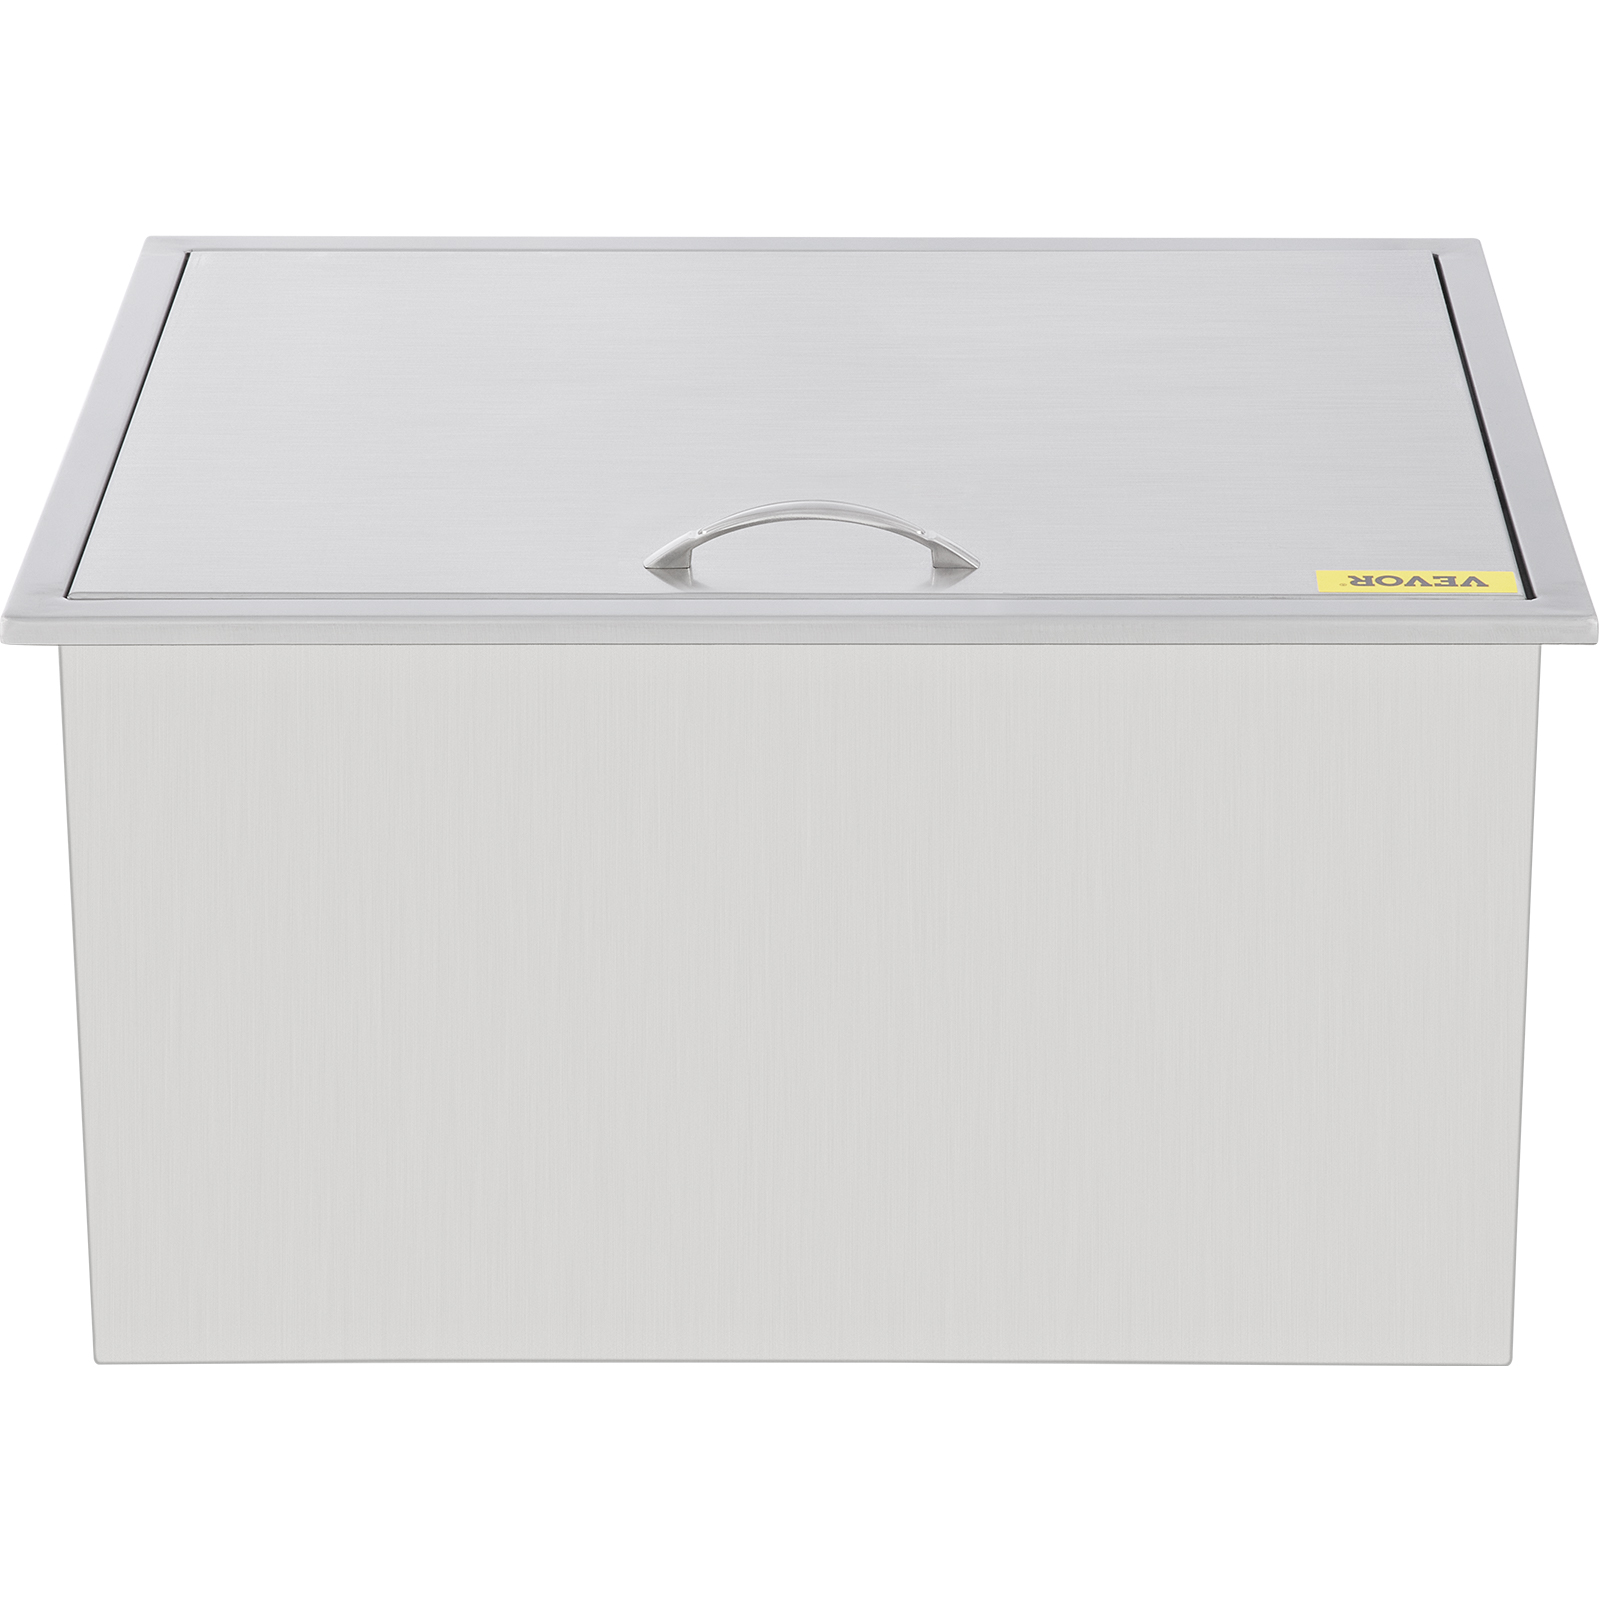 Summerset Grills 28-Inch Stainless Steel Drop-In Ice Bin Cooler with  Removable Lid - 40 Lb. Ice Capacity